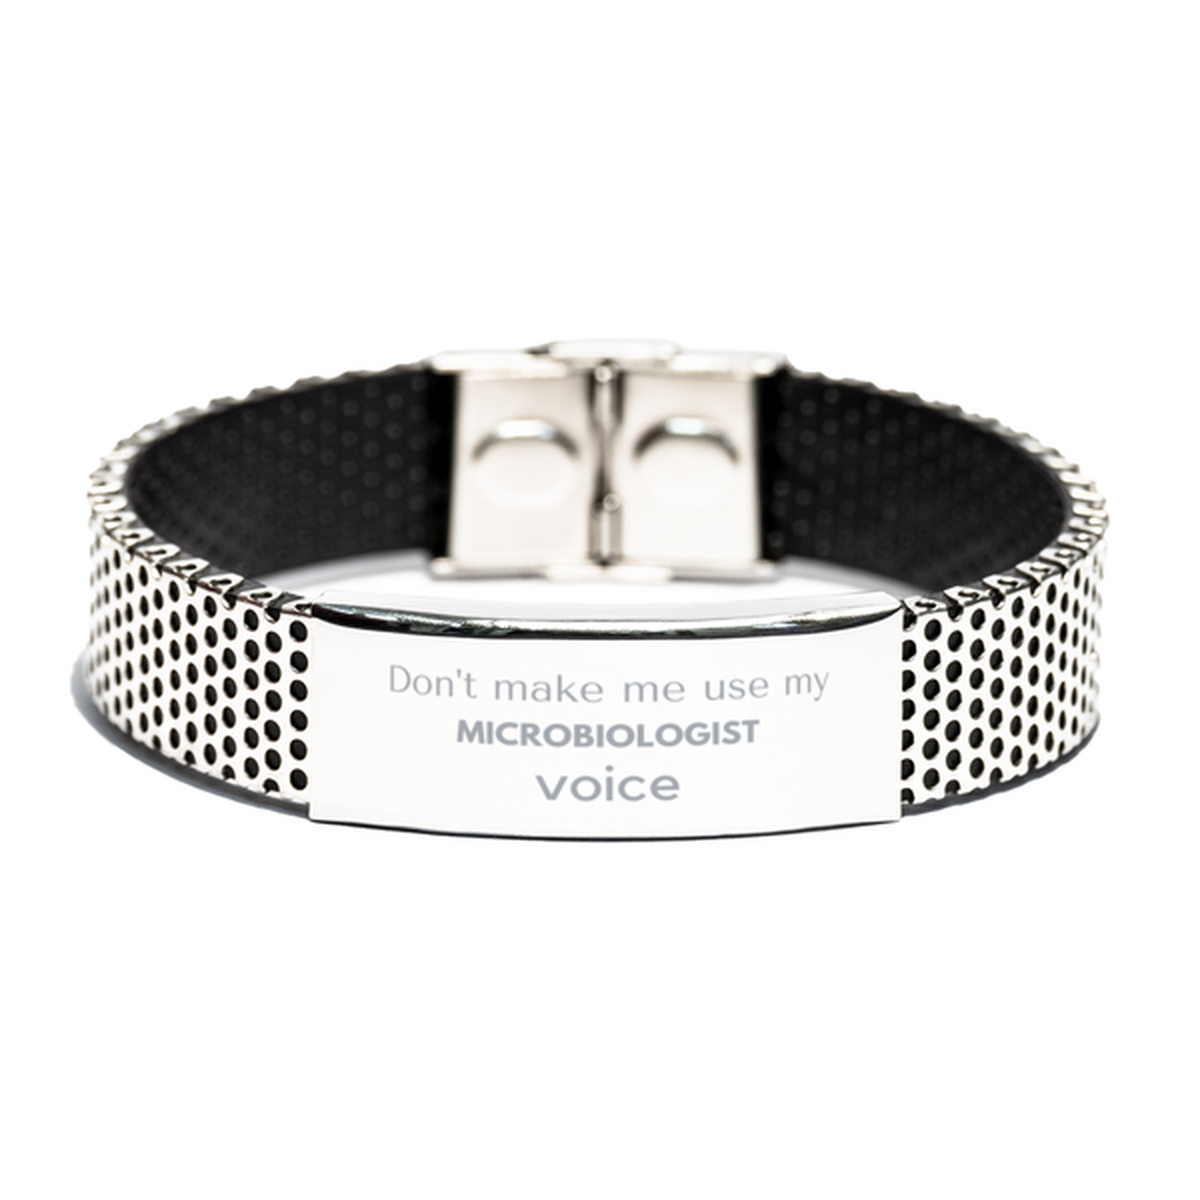 Don't make me use my Microbiologist voice, Sarcasm Microbiologist Gifts, Christmas Microbiologist Stainless Steel Bracelet Birthday Unique Gifts For Microbiologist Coworkers, Men, Women, Colleague, Friends